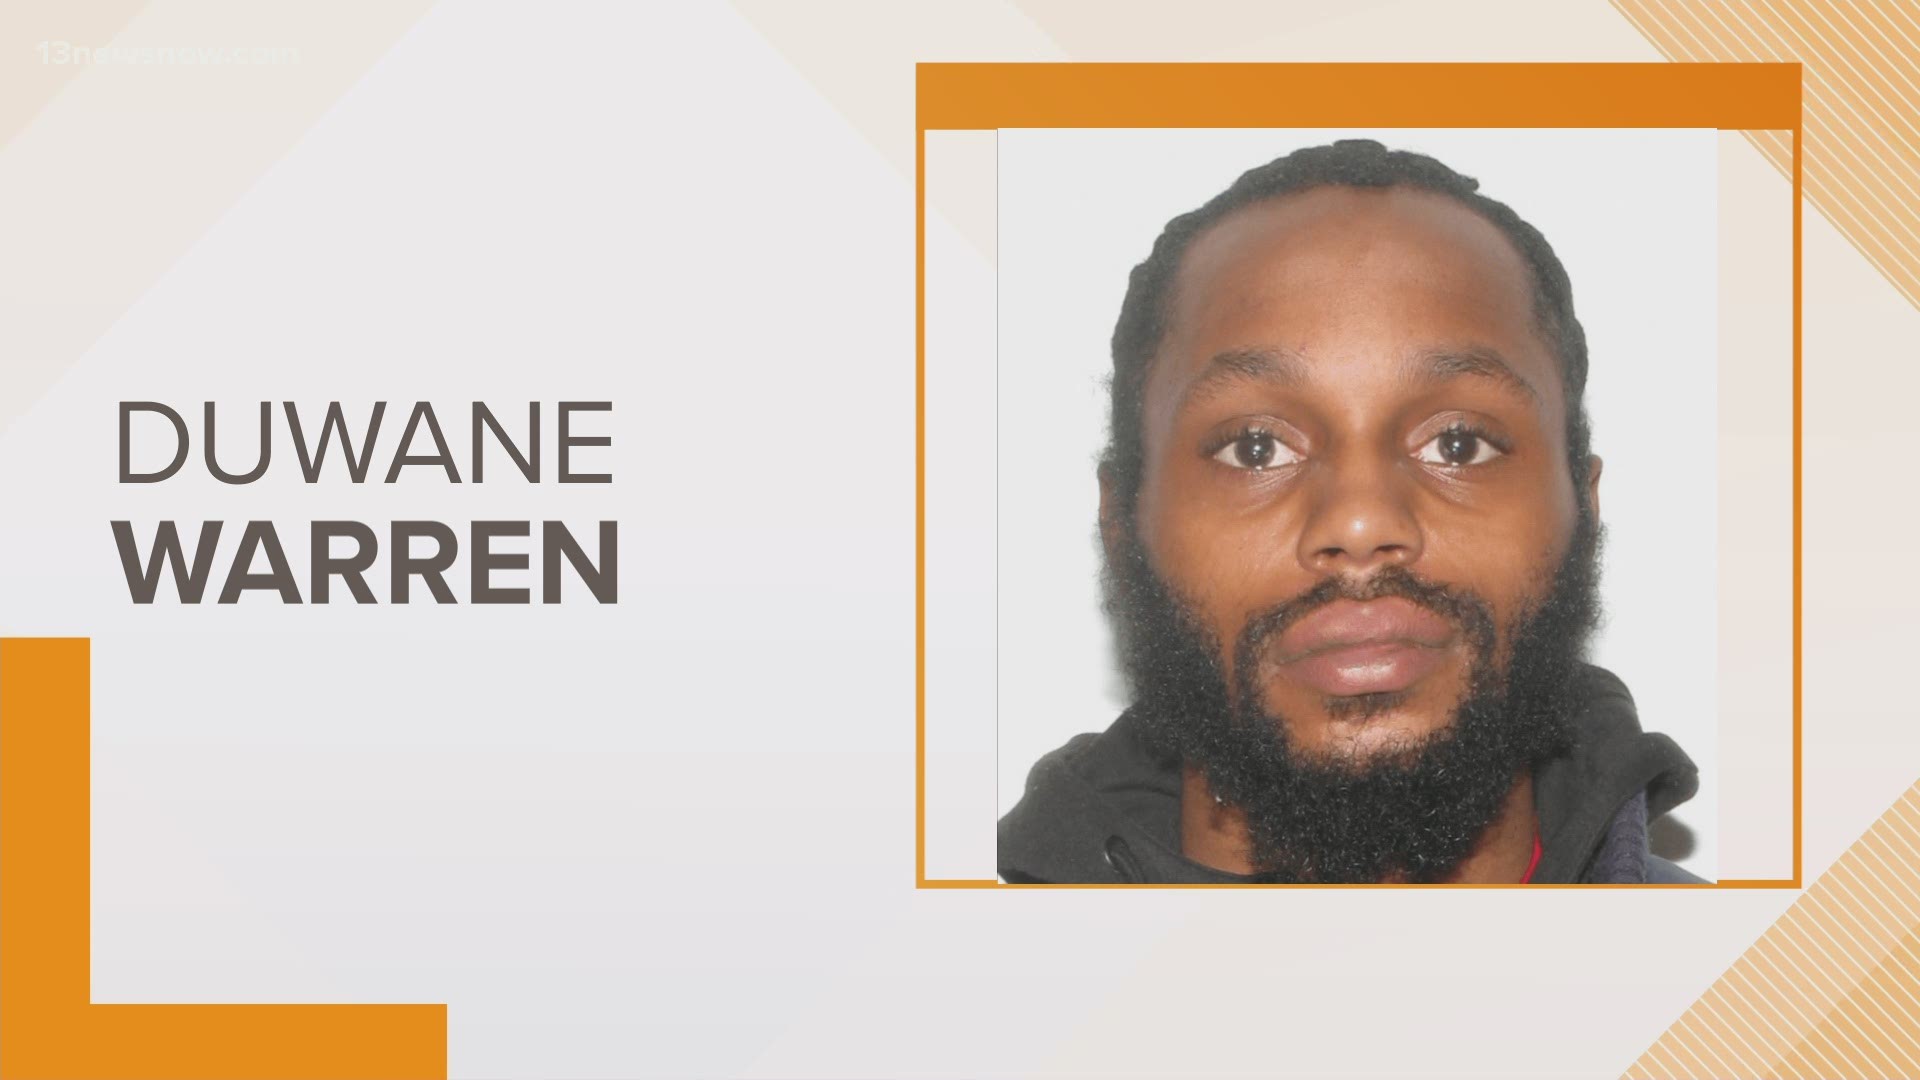 Duwane Warren is charged with two counts of second-degree murder, after an incident that occurred on Dec. 29 which resulted in the death of a woman and baby.